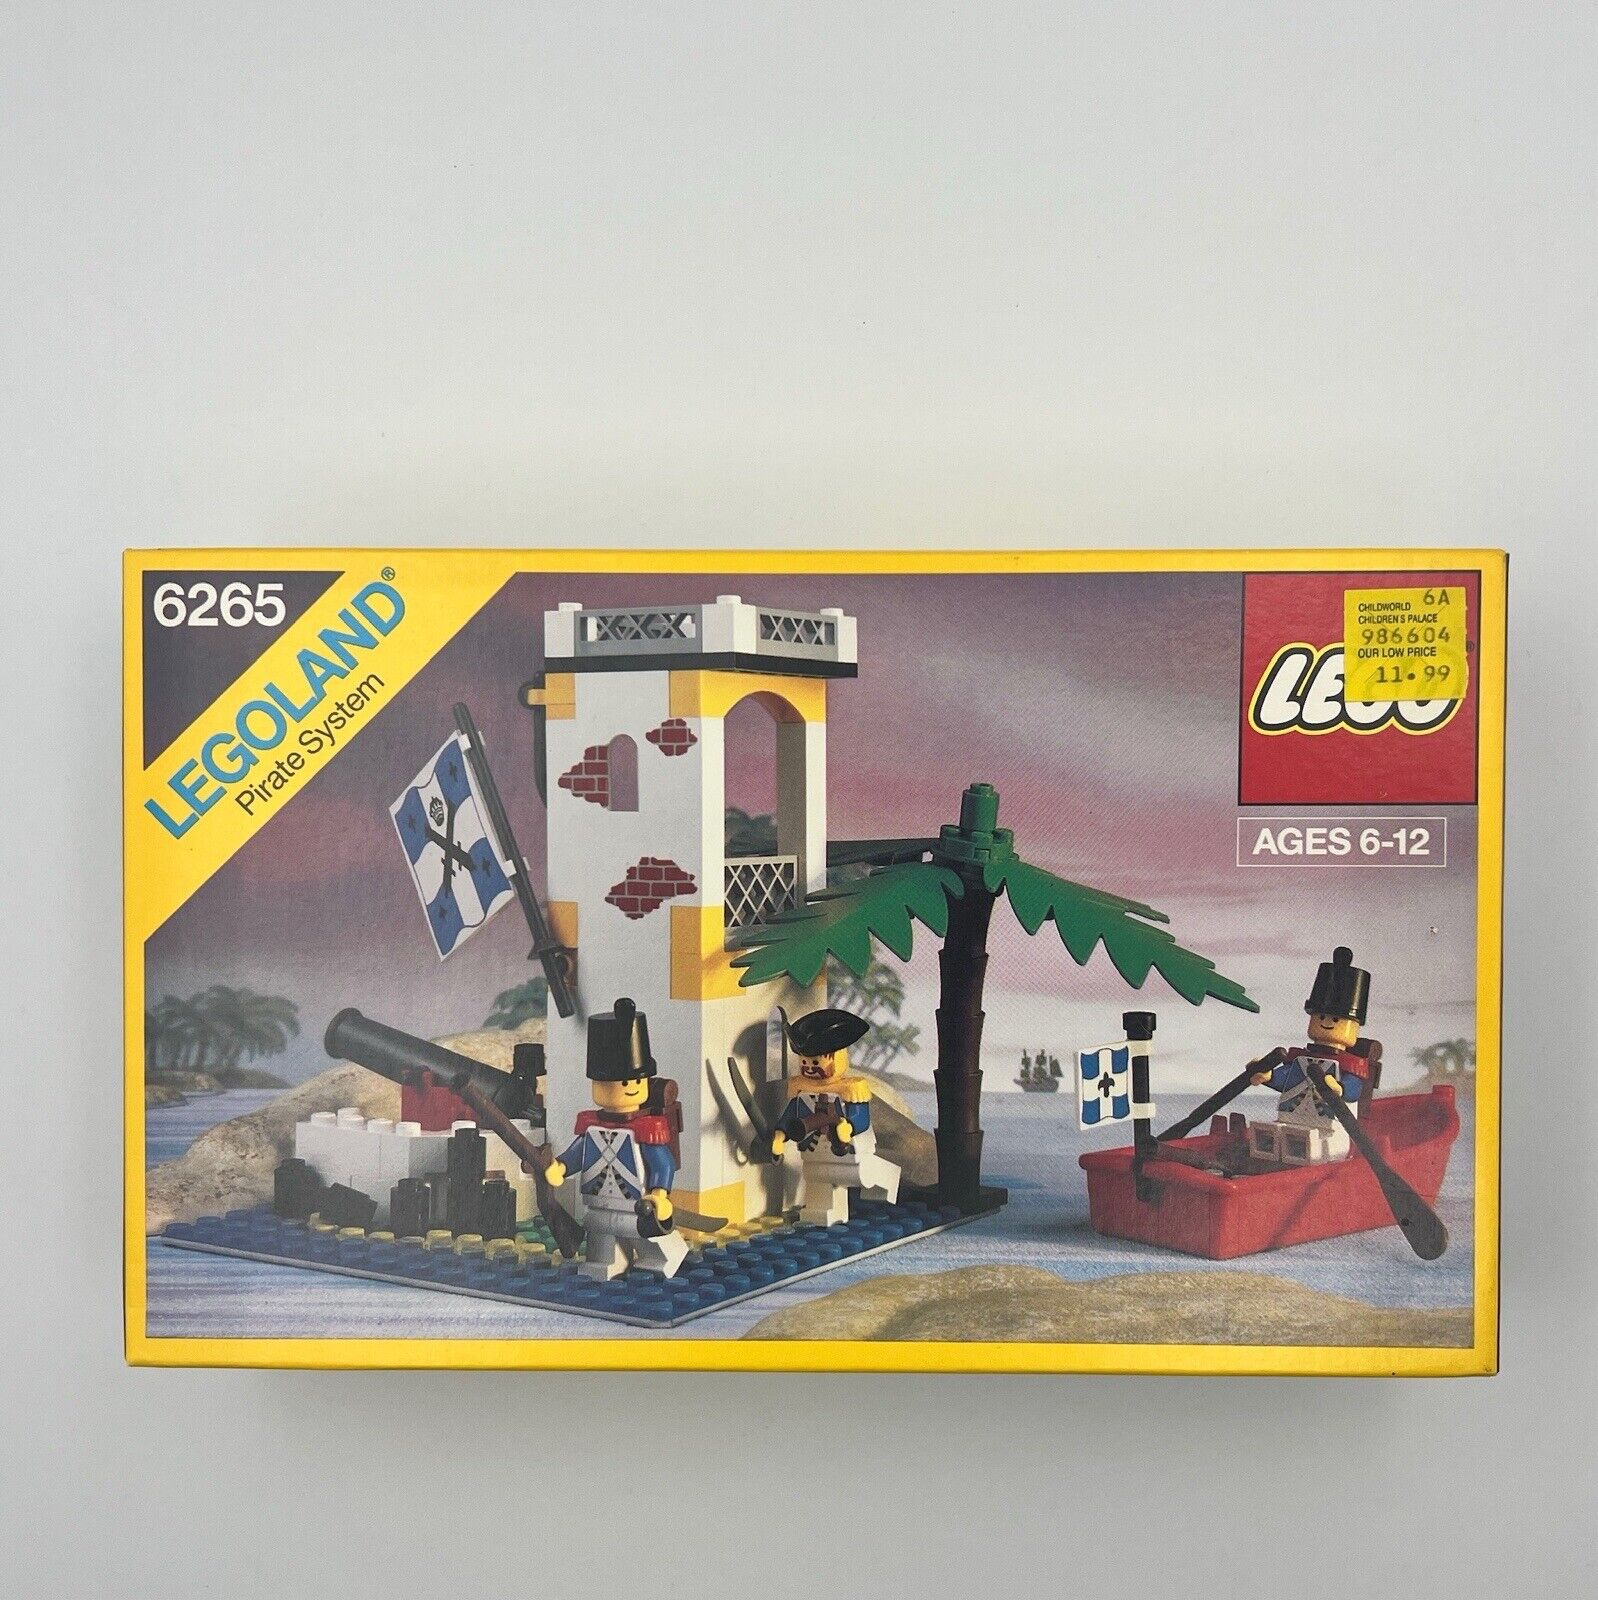 LEGO 6265 Pirates 1 Imperial Soldiers Sabre Island Sealed from 1989